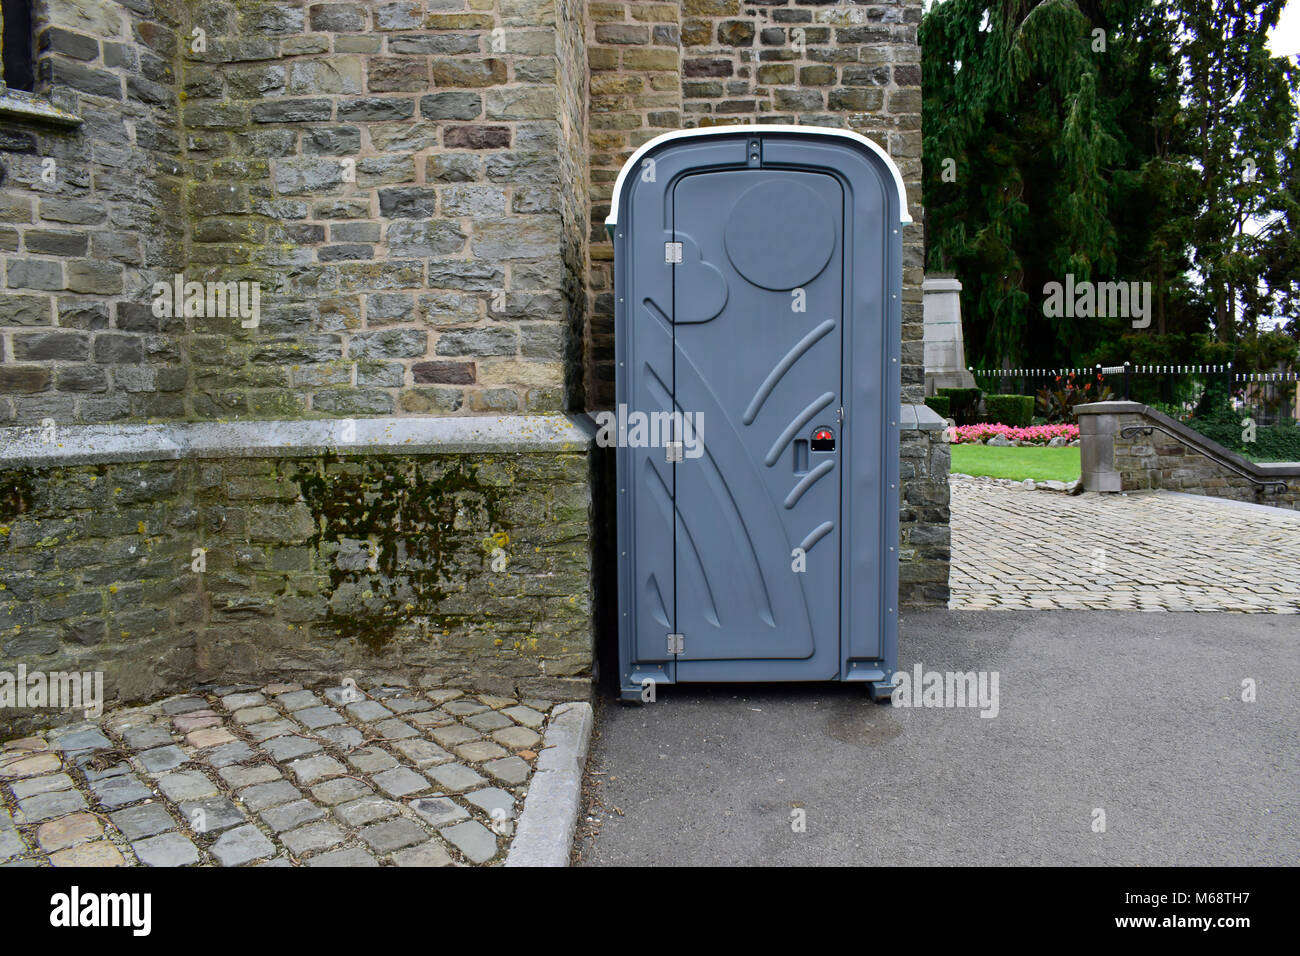 Portable toilet cabins or mobile toilet on the road and wall background. Stock Photo